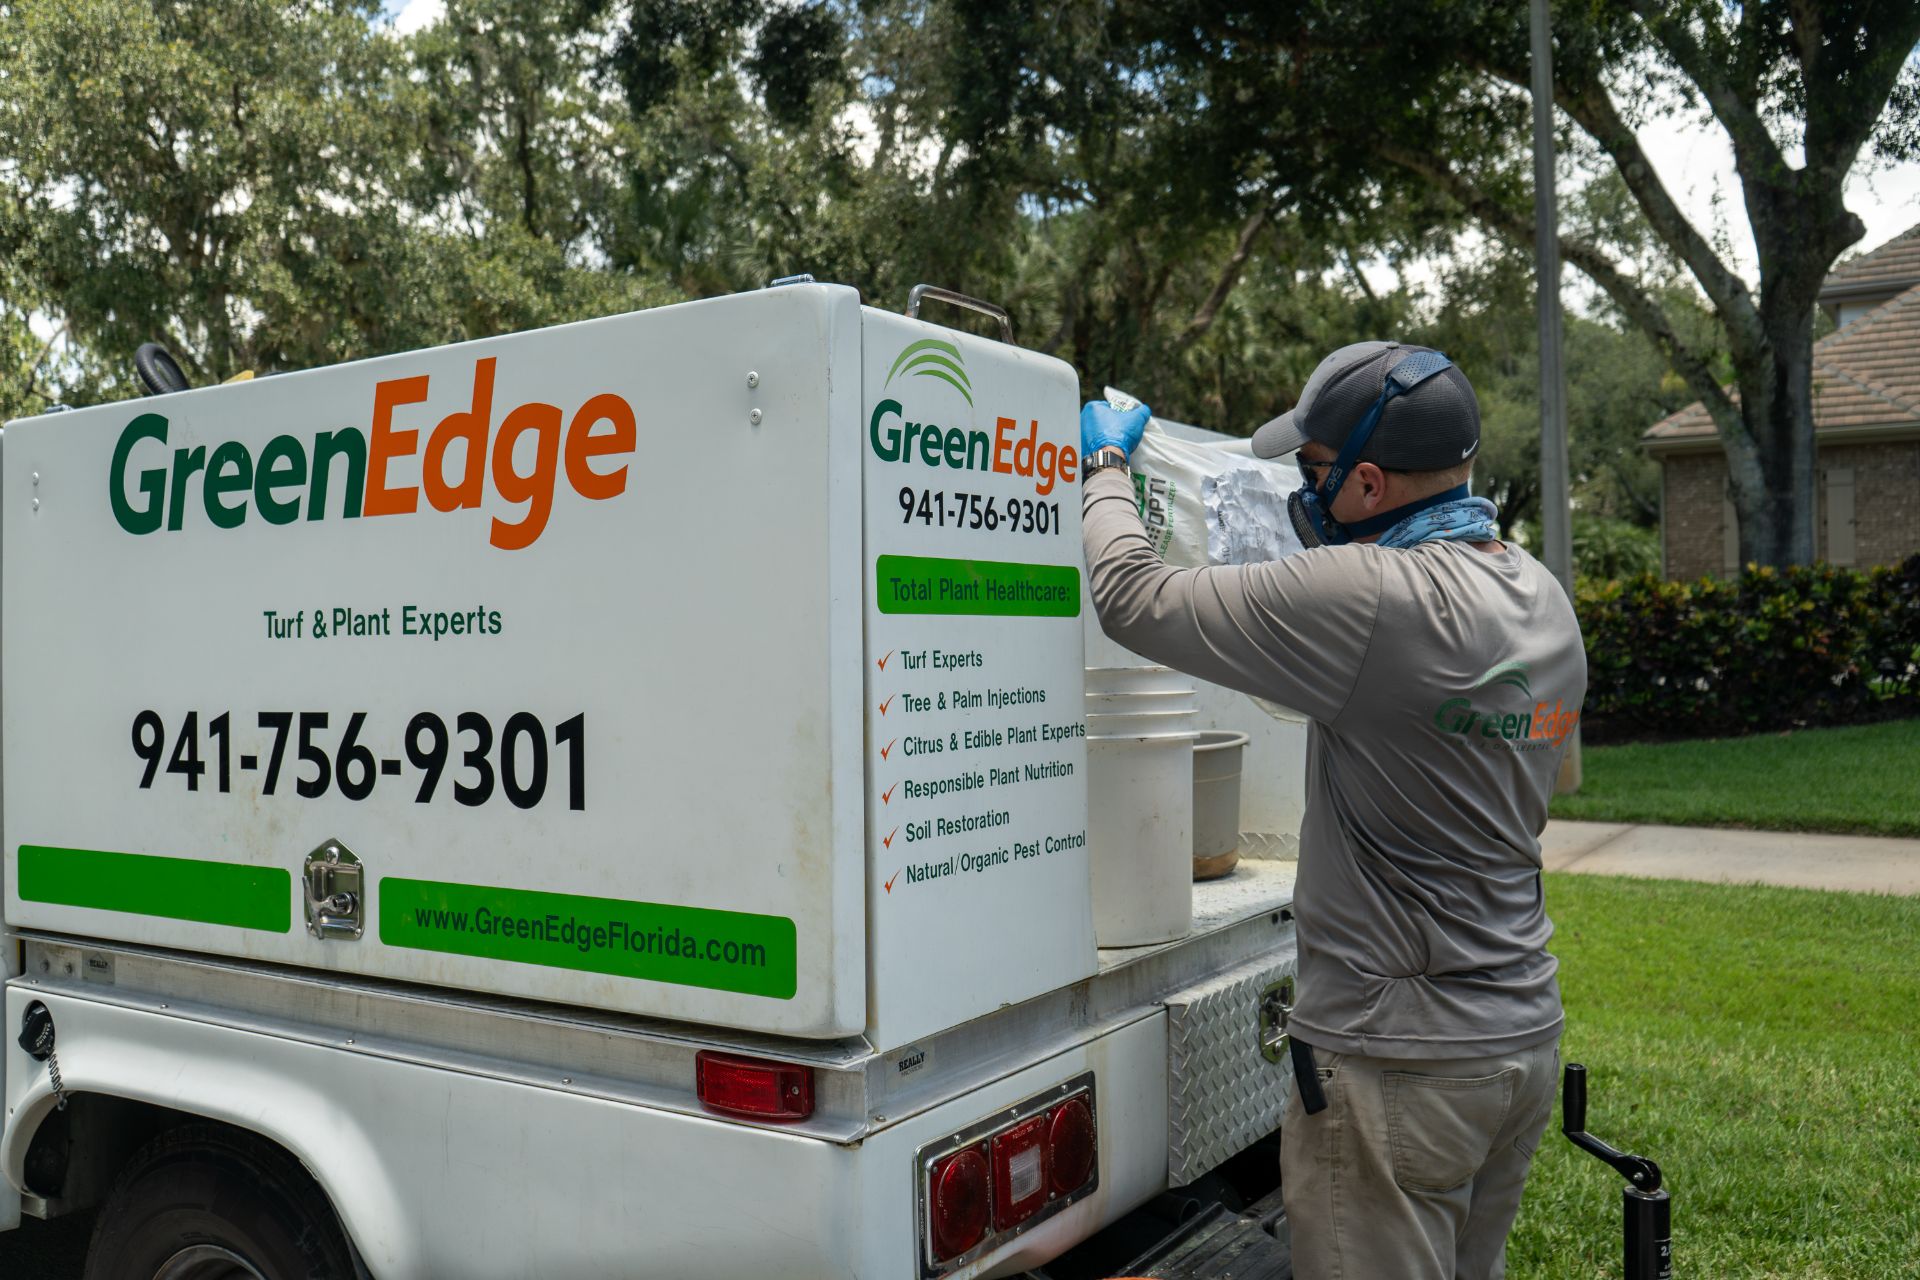 A GreenEdge staff member proudly representing the company in a GreenEdge truck in Sarasota. Our dedicated team uses these vehicles as they provide efficient and reliable transportation to deliver our high-quality services. Trust GreenEdge for professional expertise and reliable service in maintaining and enhancing your outdoor spaces.